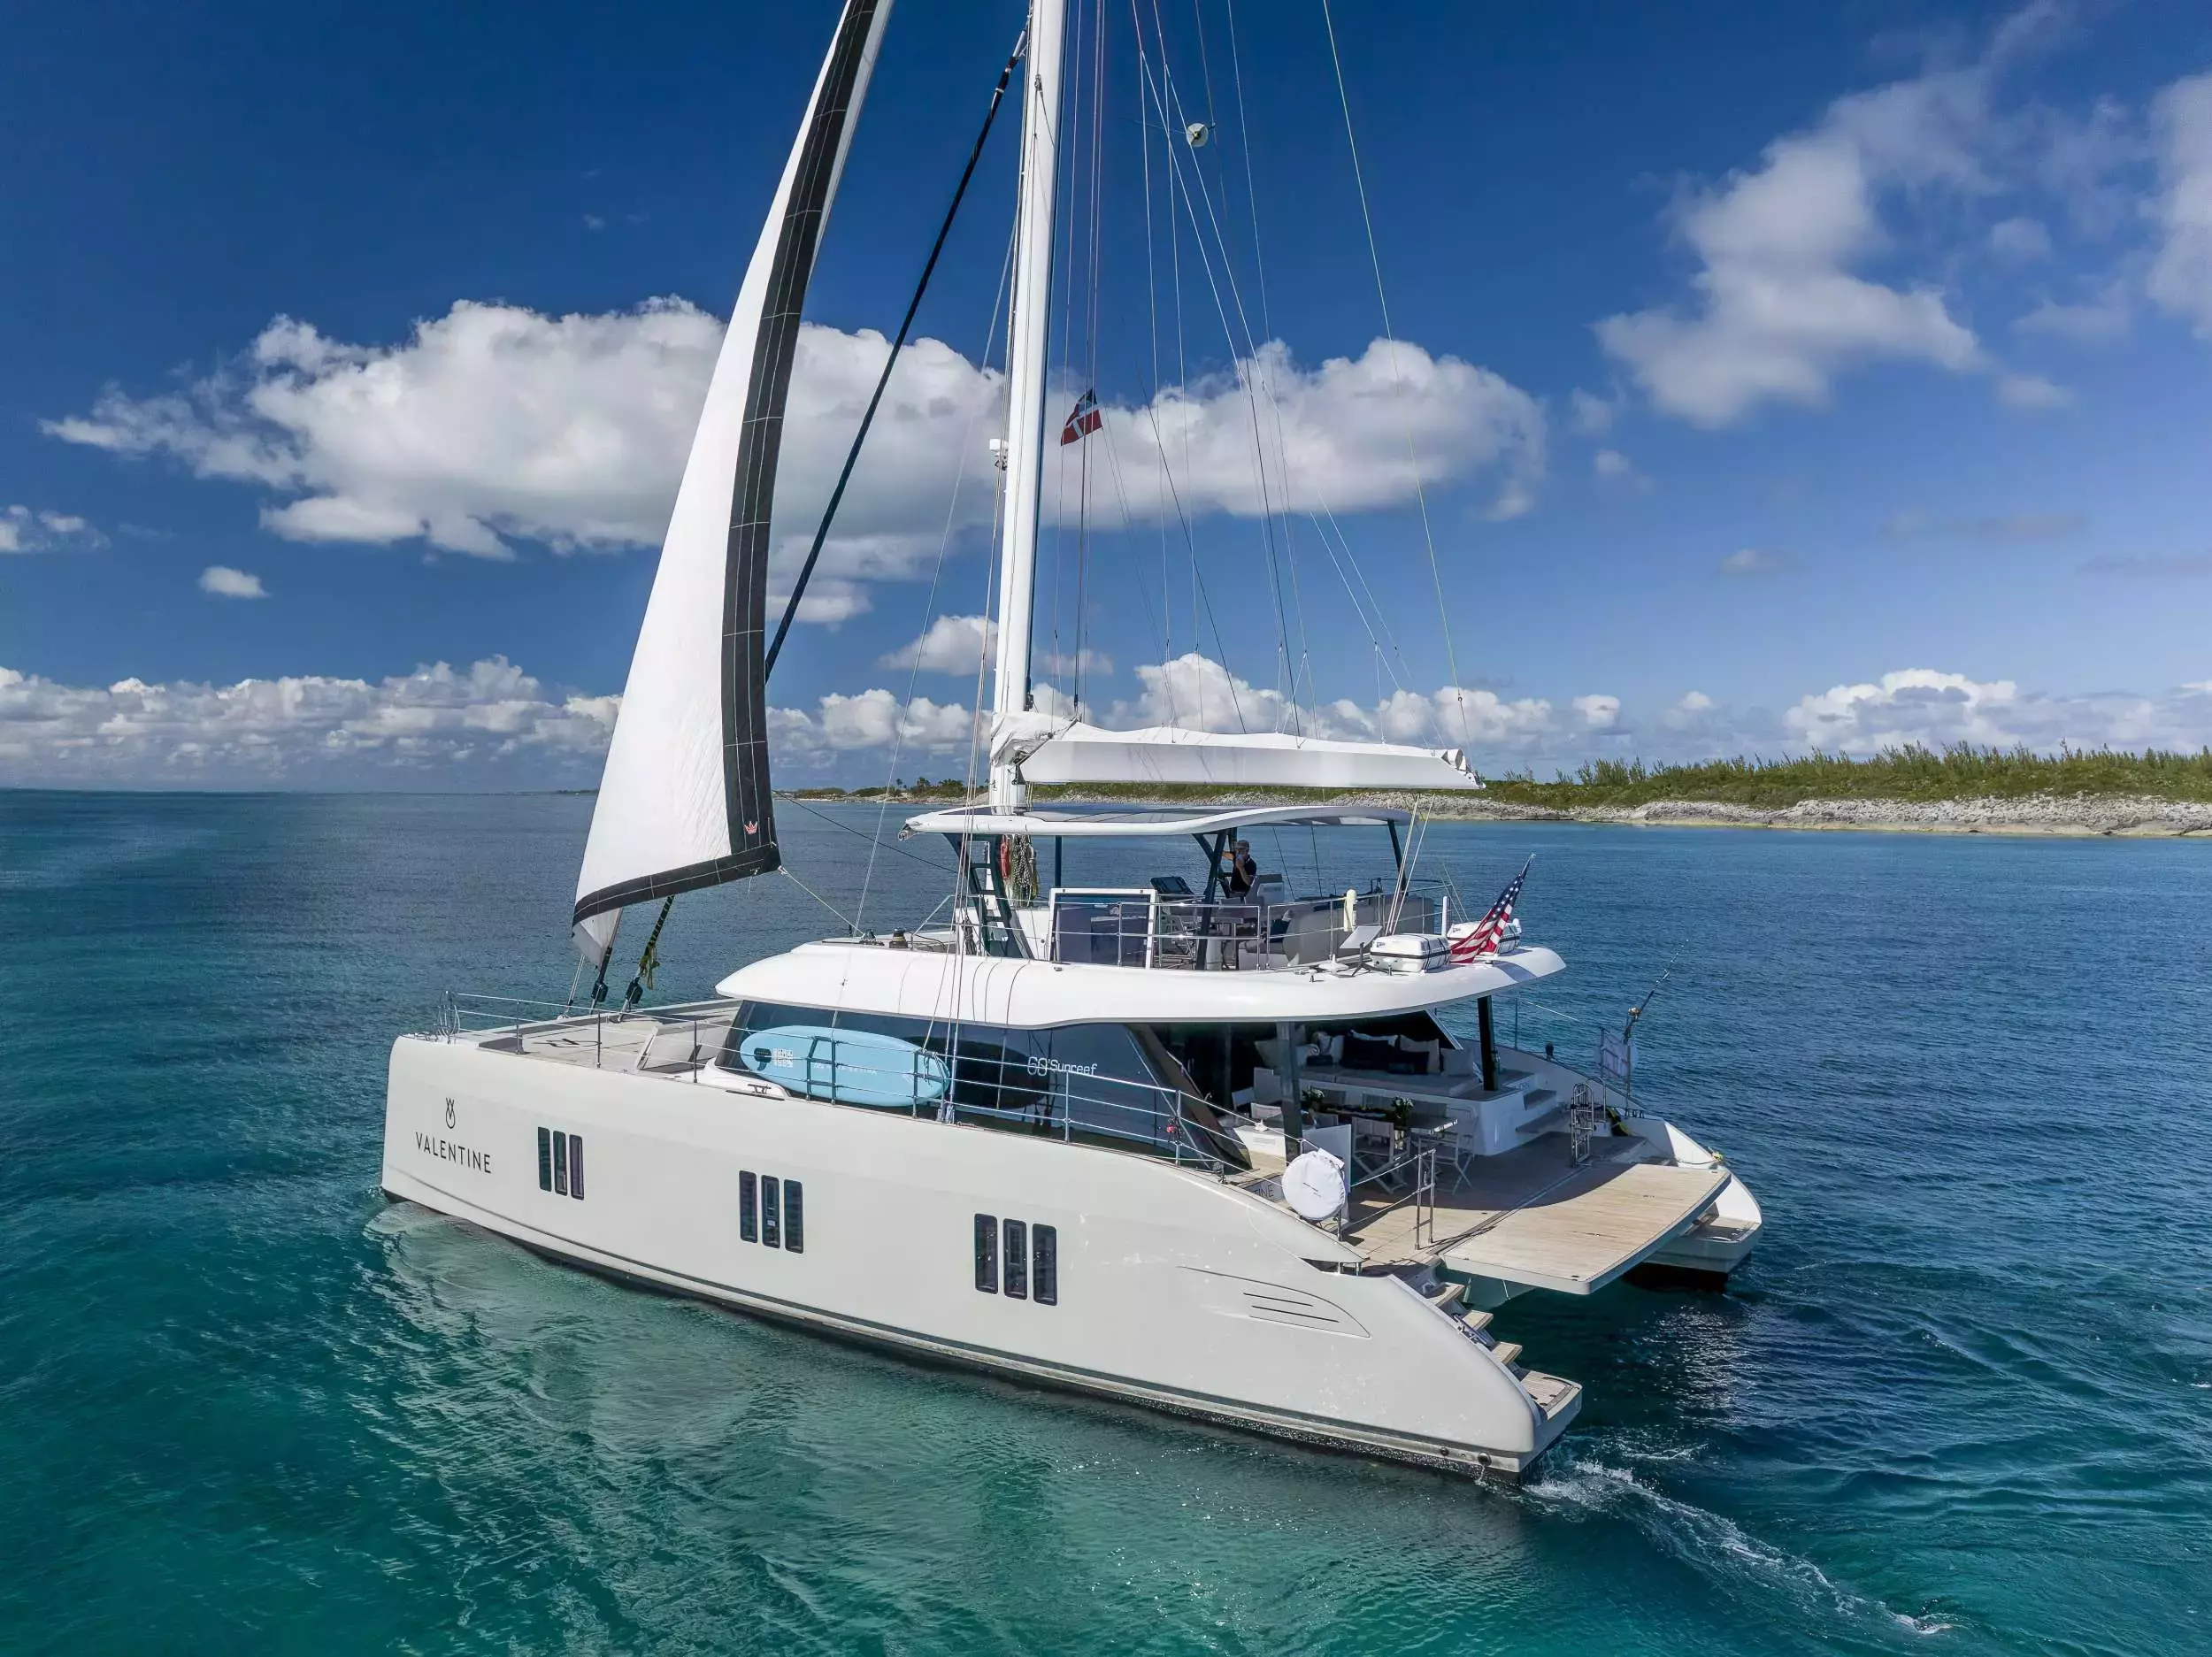 Valentine by Sunreef Yachts - Top rates for a Charter of a private Power Catamaran in US Virgin Islands